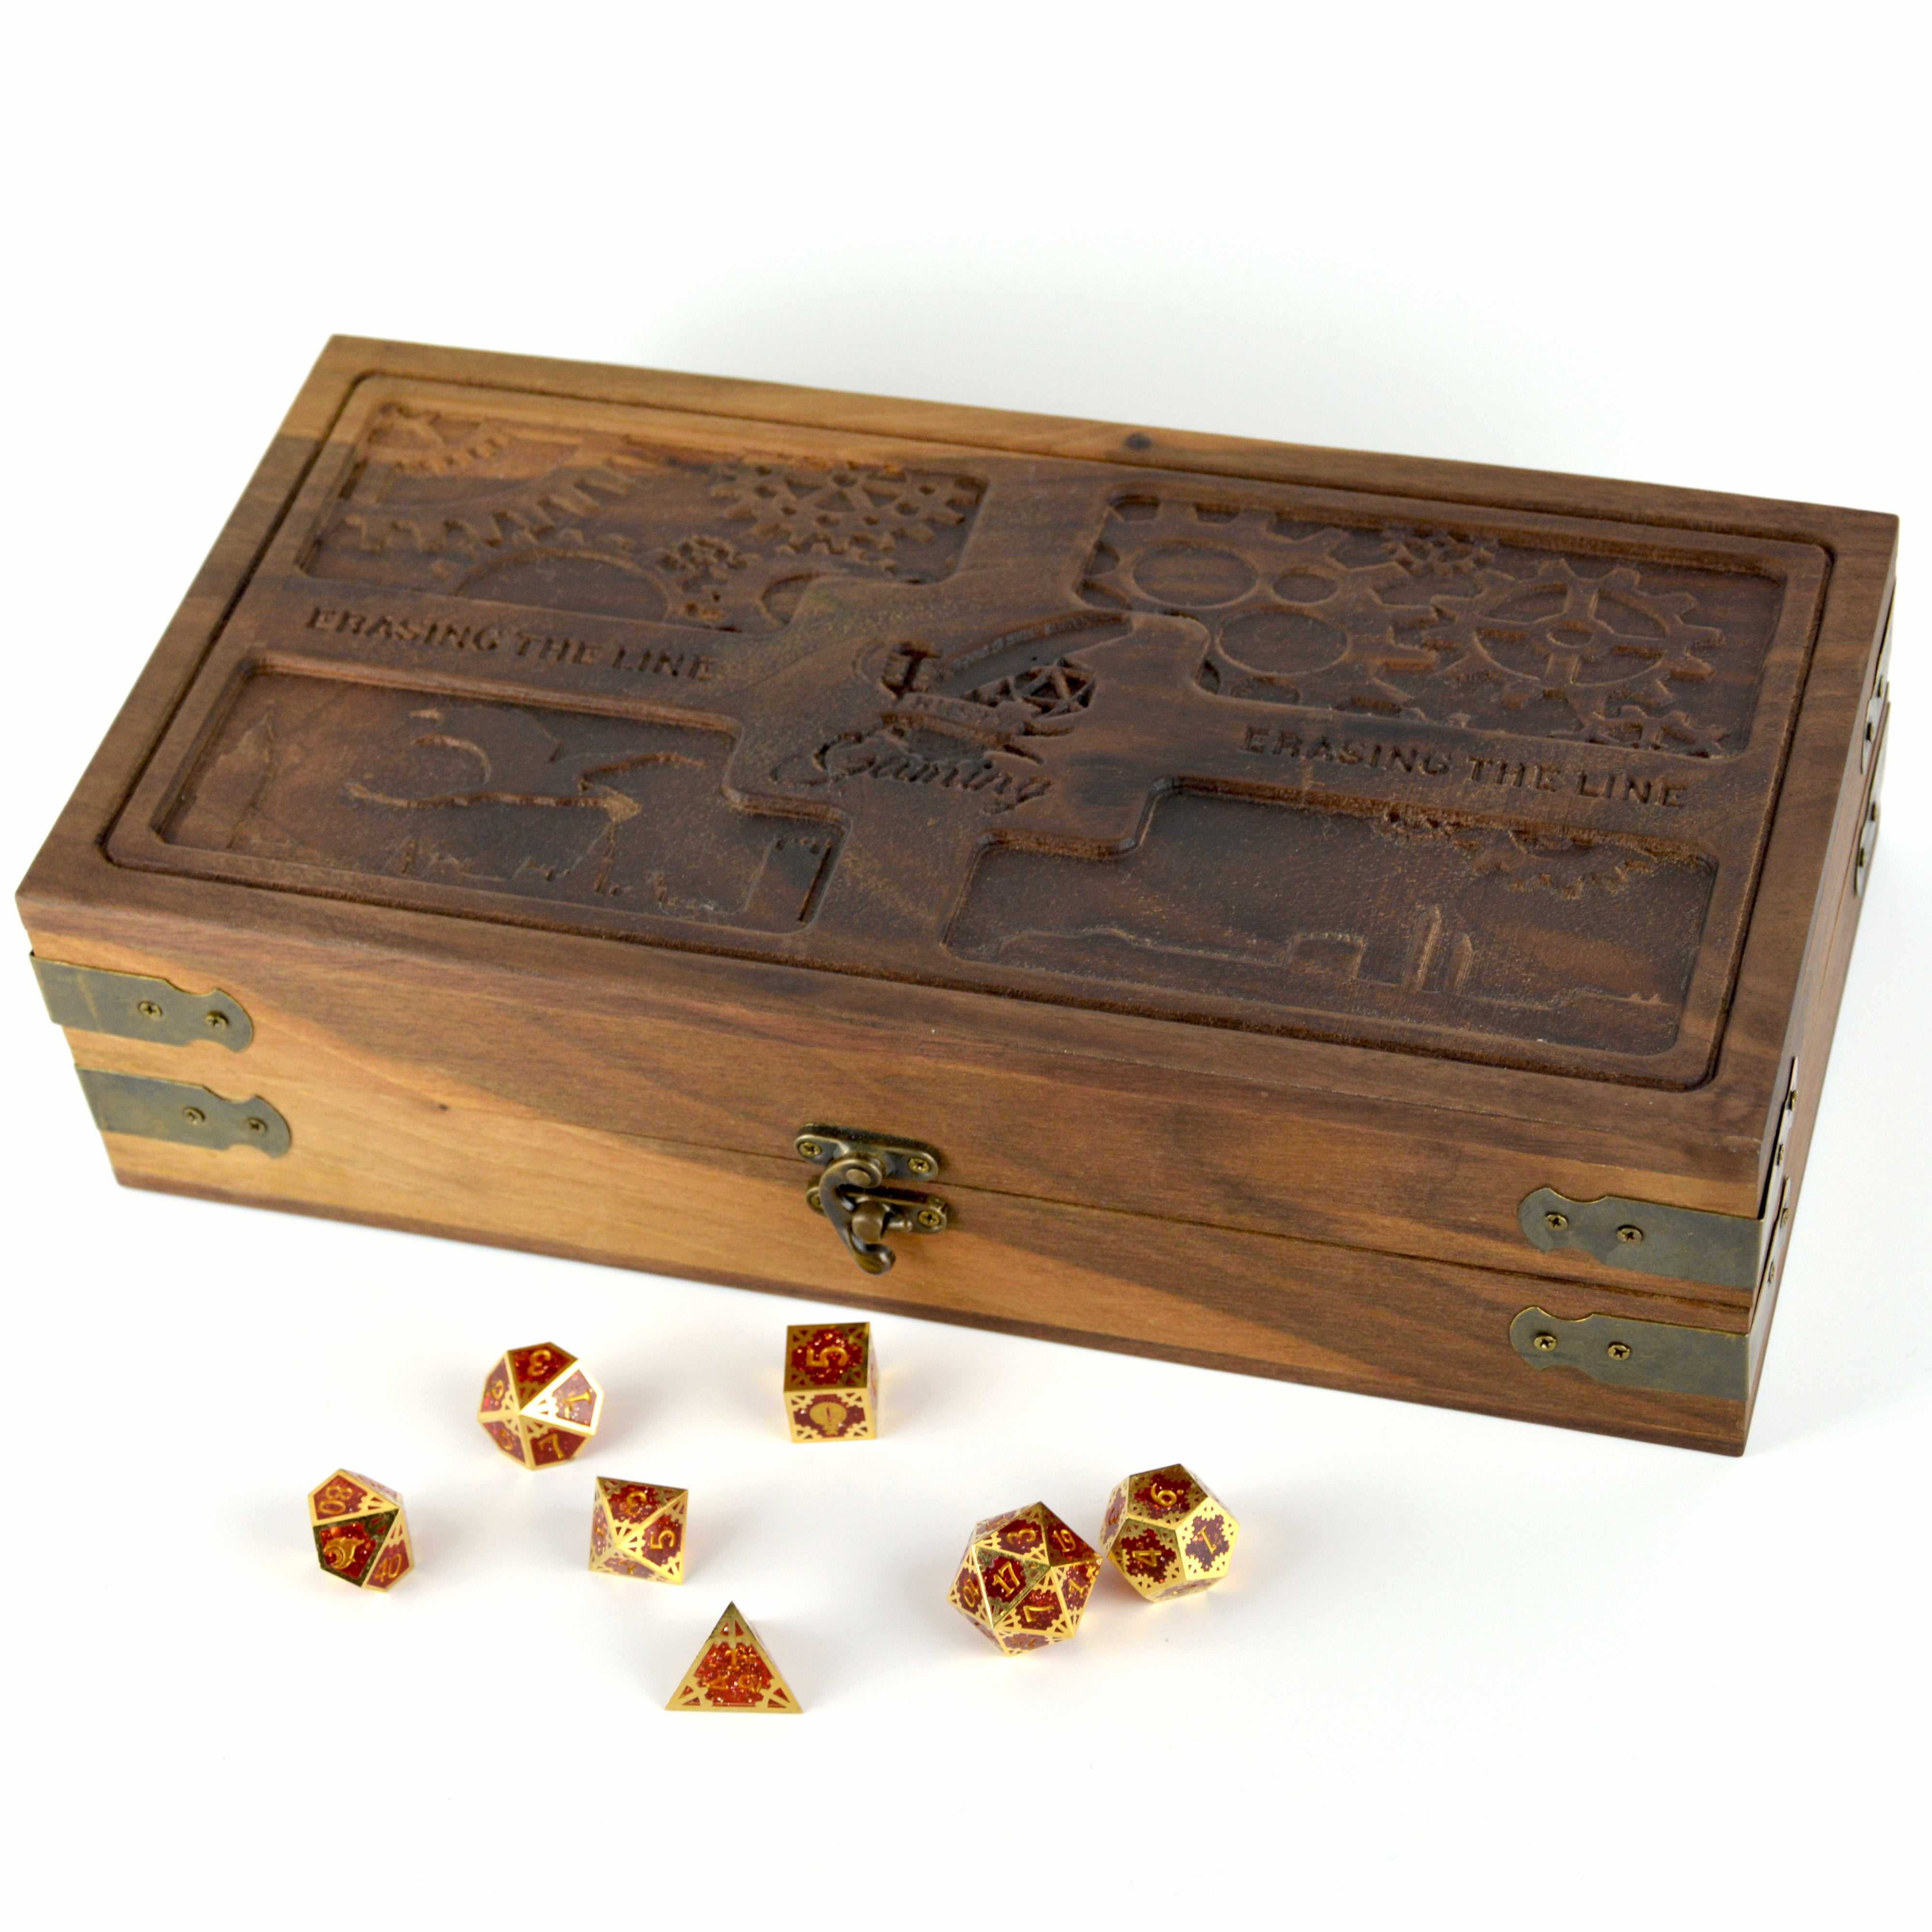 Wooden Rusty Quill Gaming Wooden Box and Resin Dice